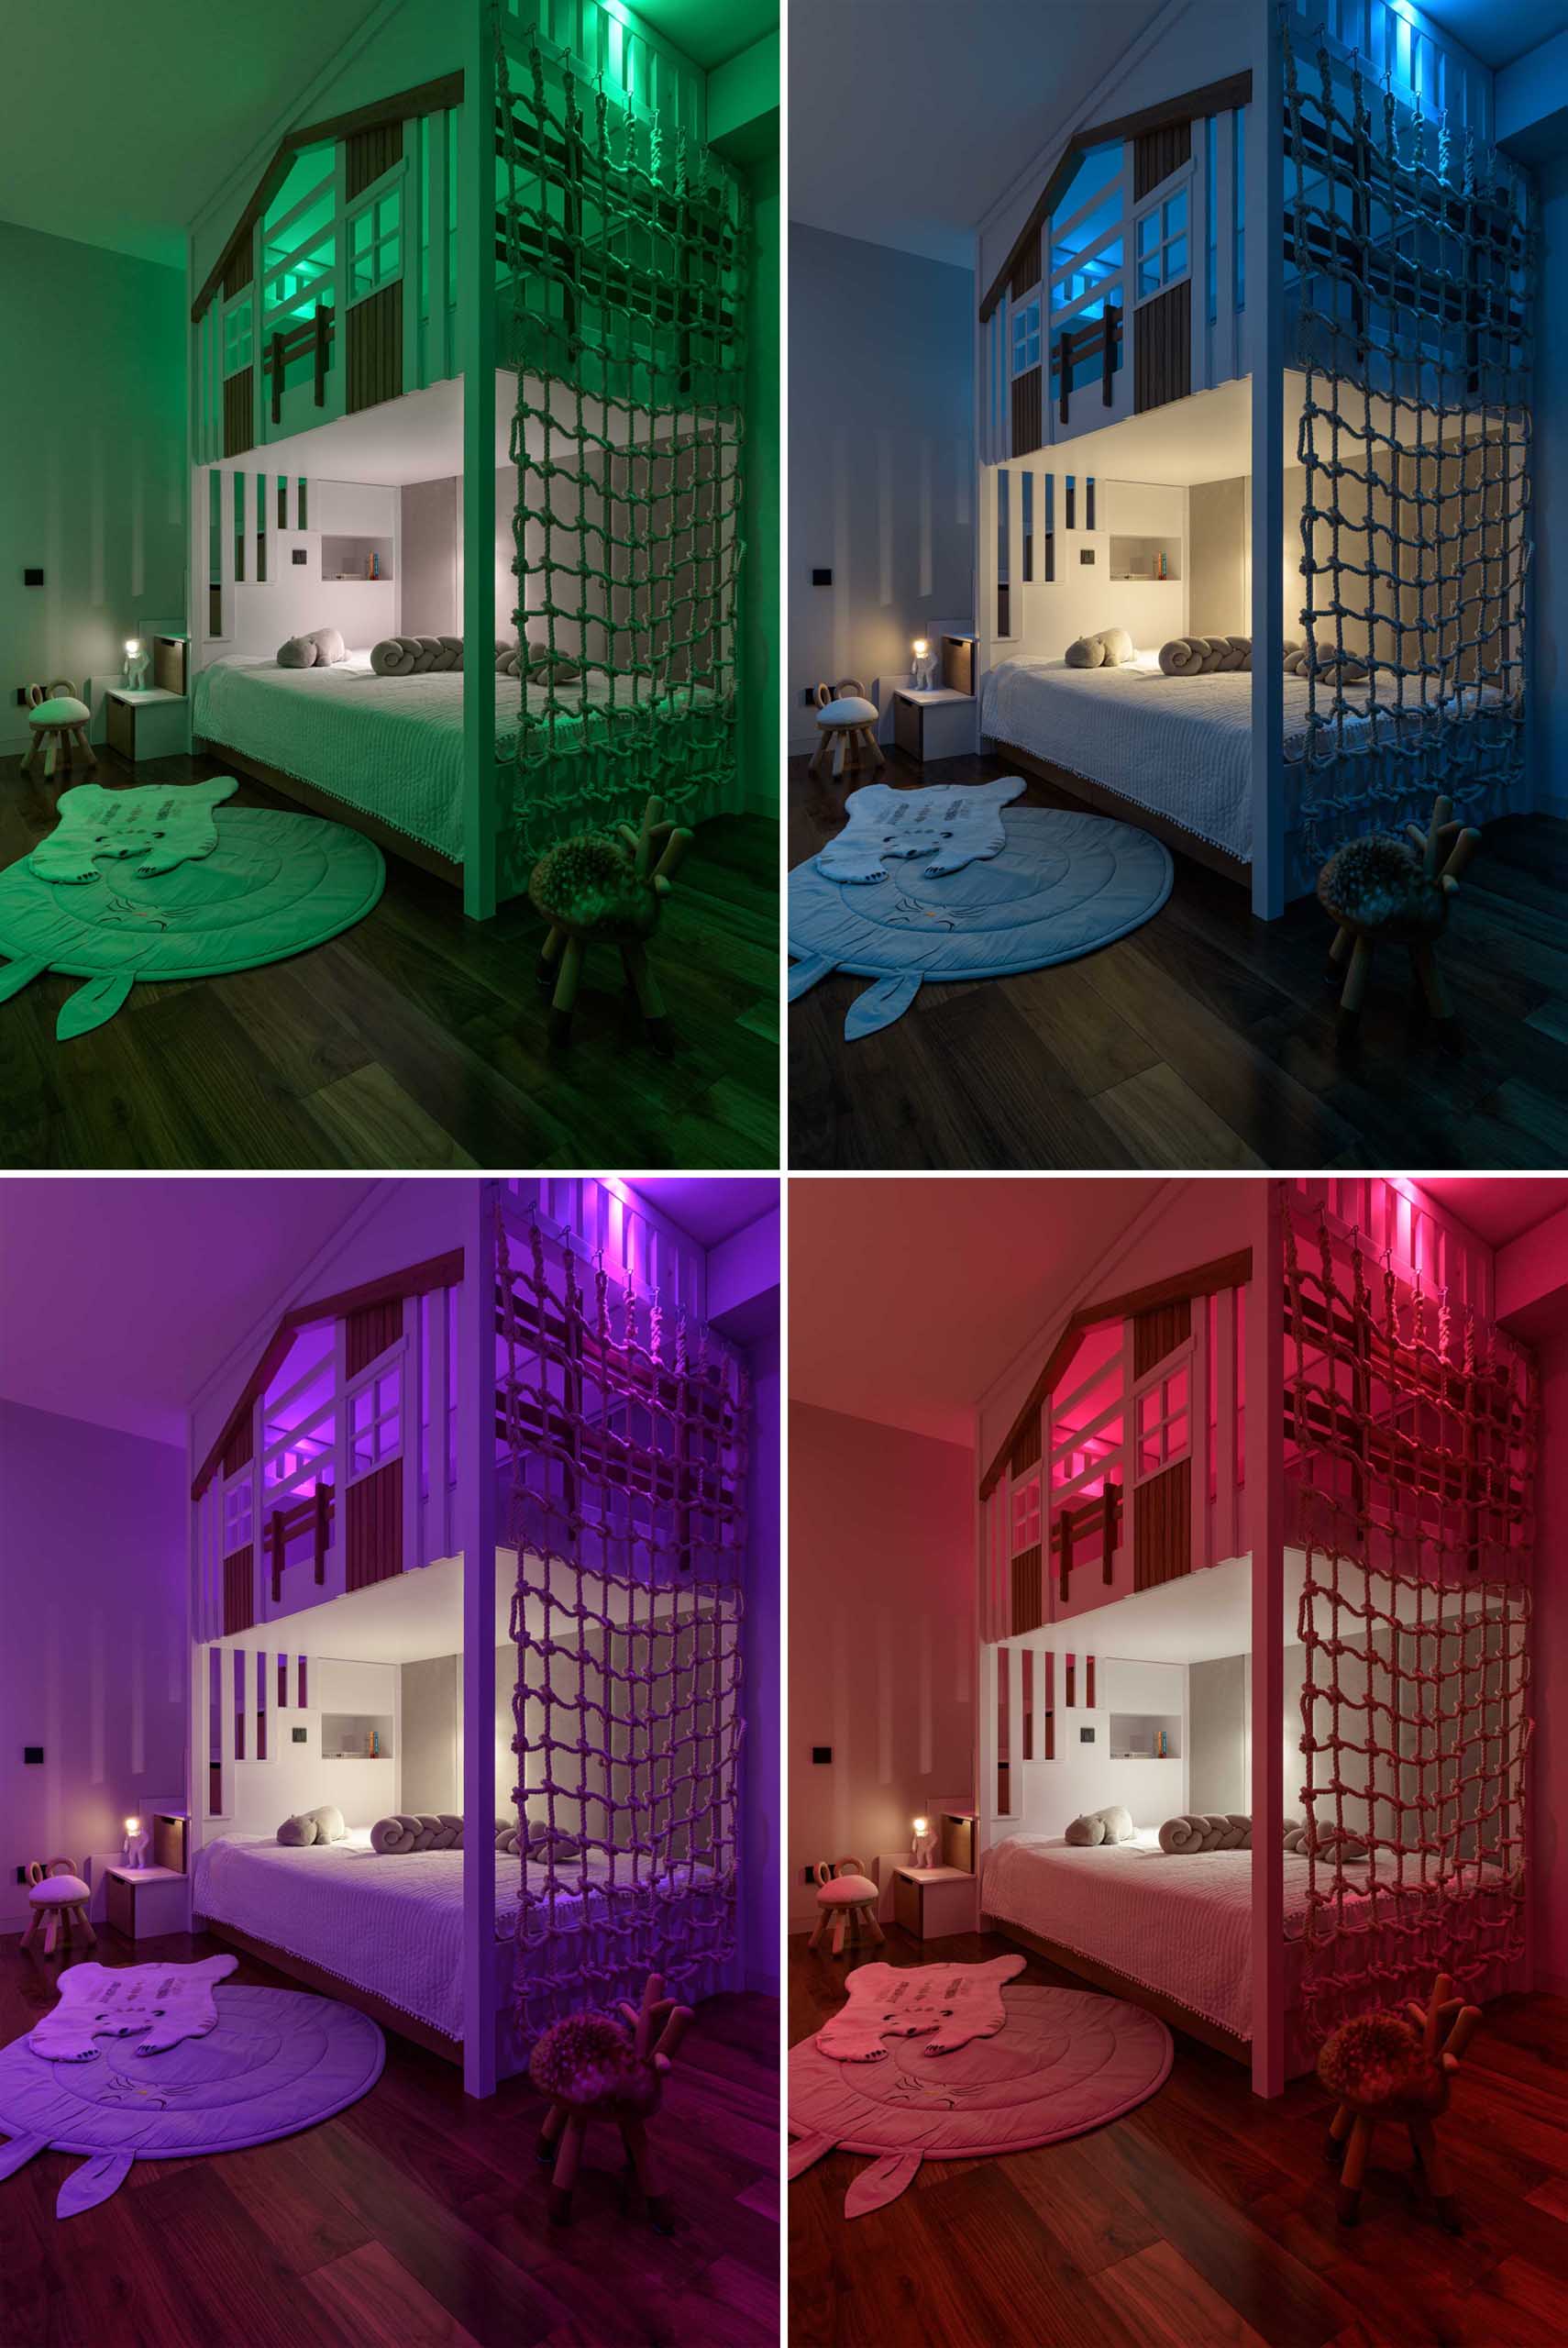 A modern kids bedroom with colour-changing lights that are controlled by remote.